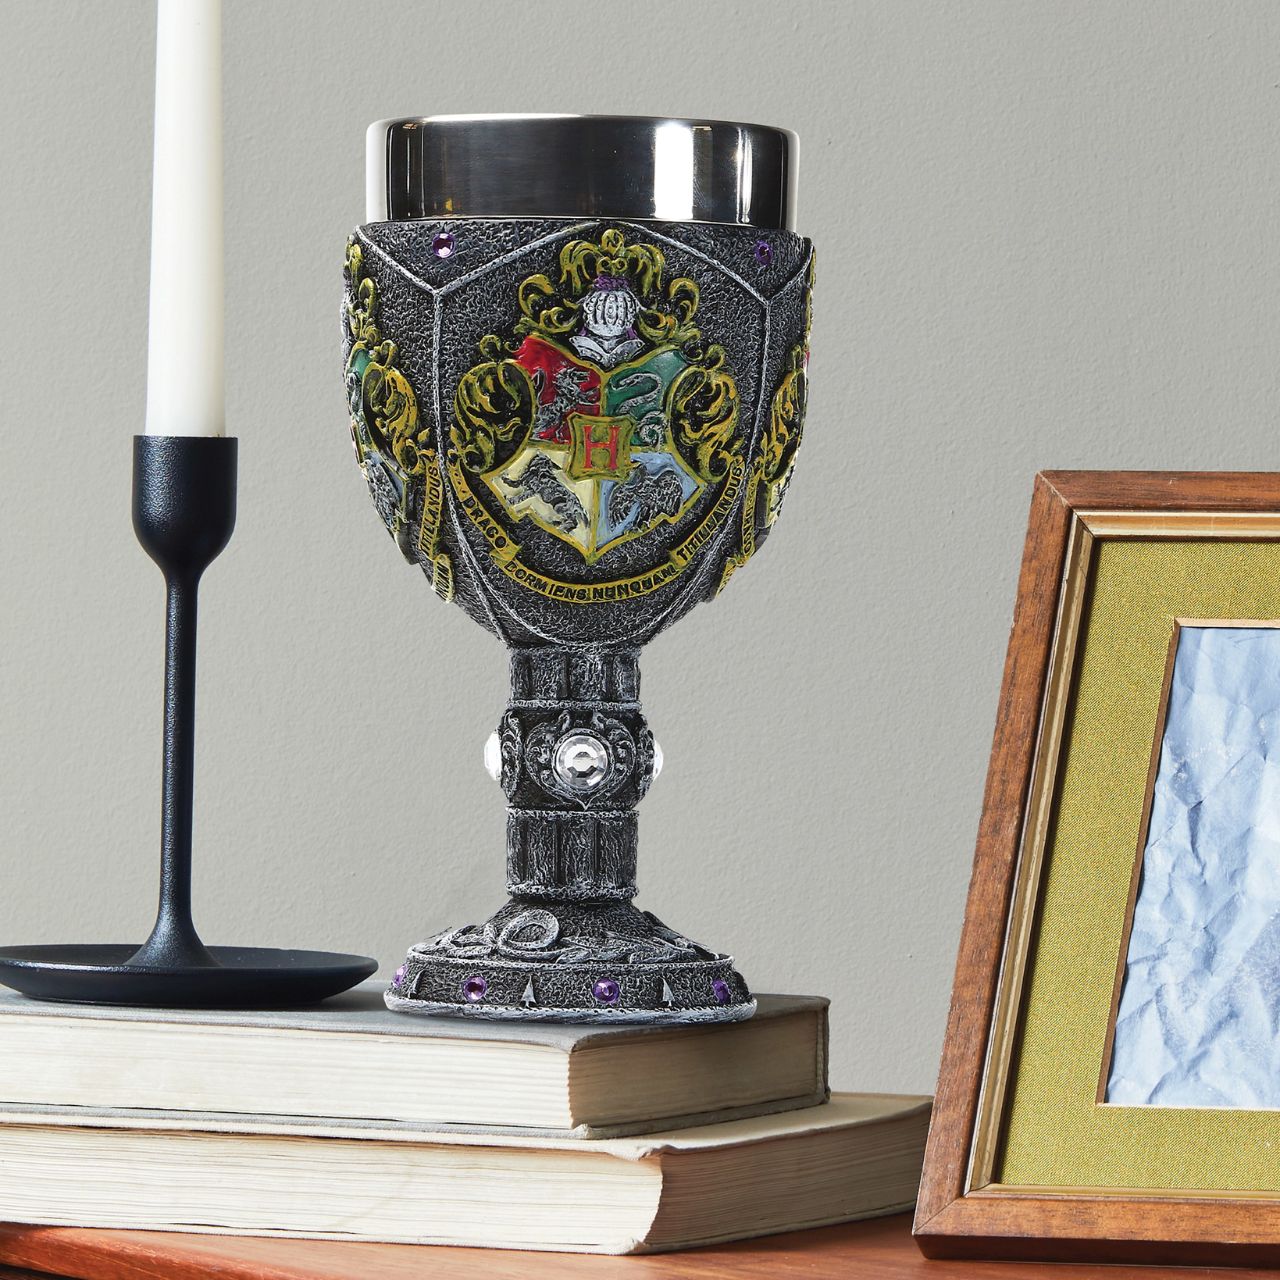 Hogwarts Decorative Goblet  Founded by the four greatest wizards of their time, Hogwarts School of Witchcraft and Wizardry has long been the pinnacle of magical learning. Show your school spirit with this elegant decorative goblet